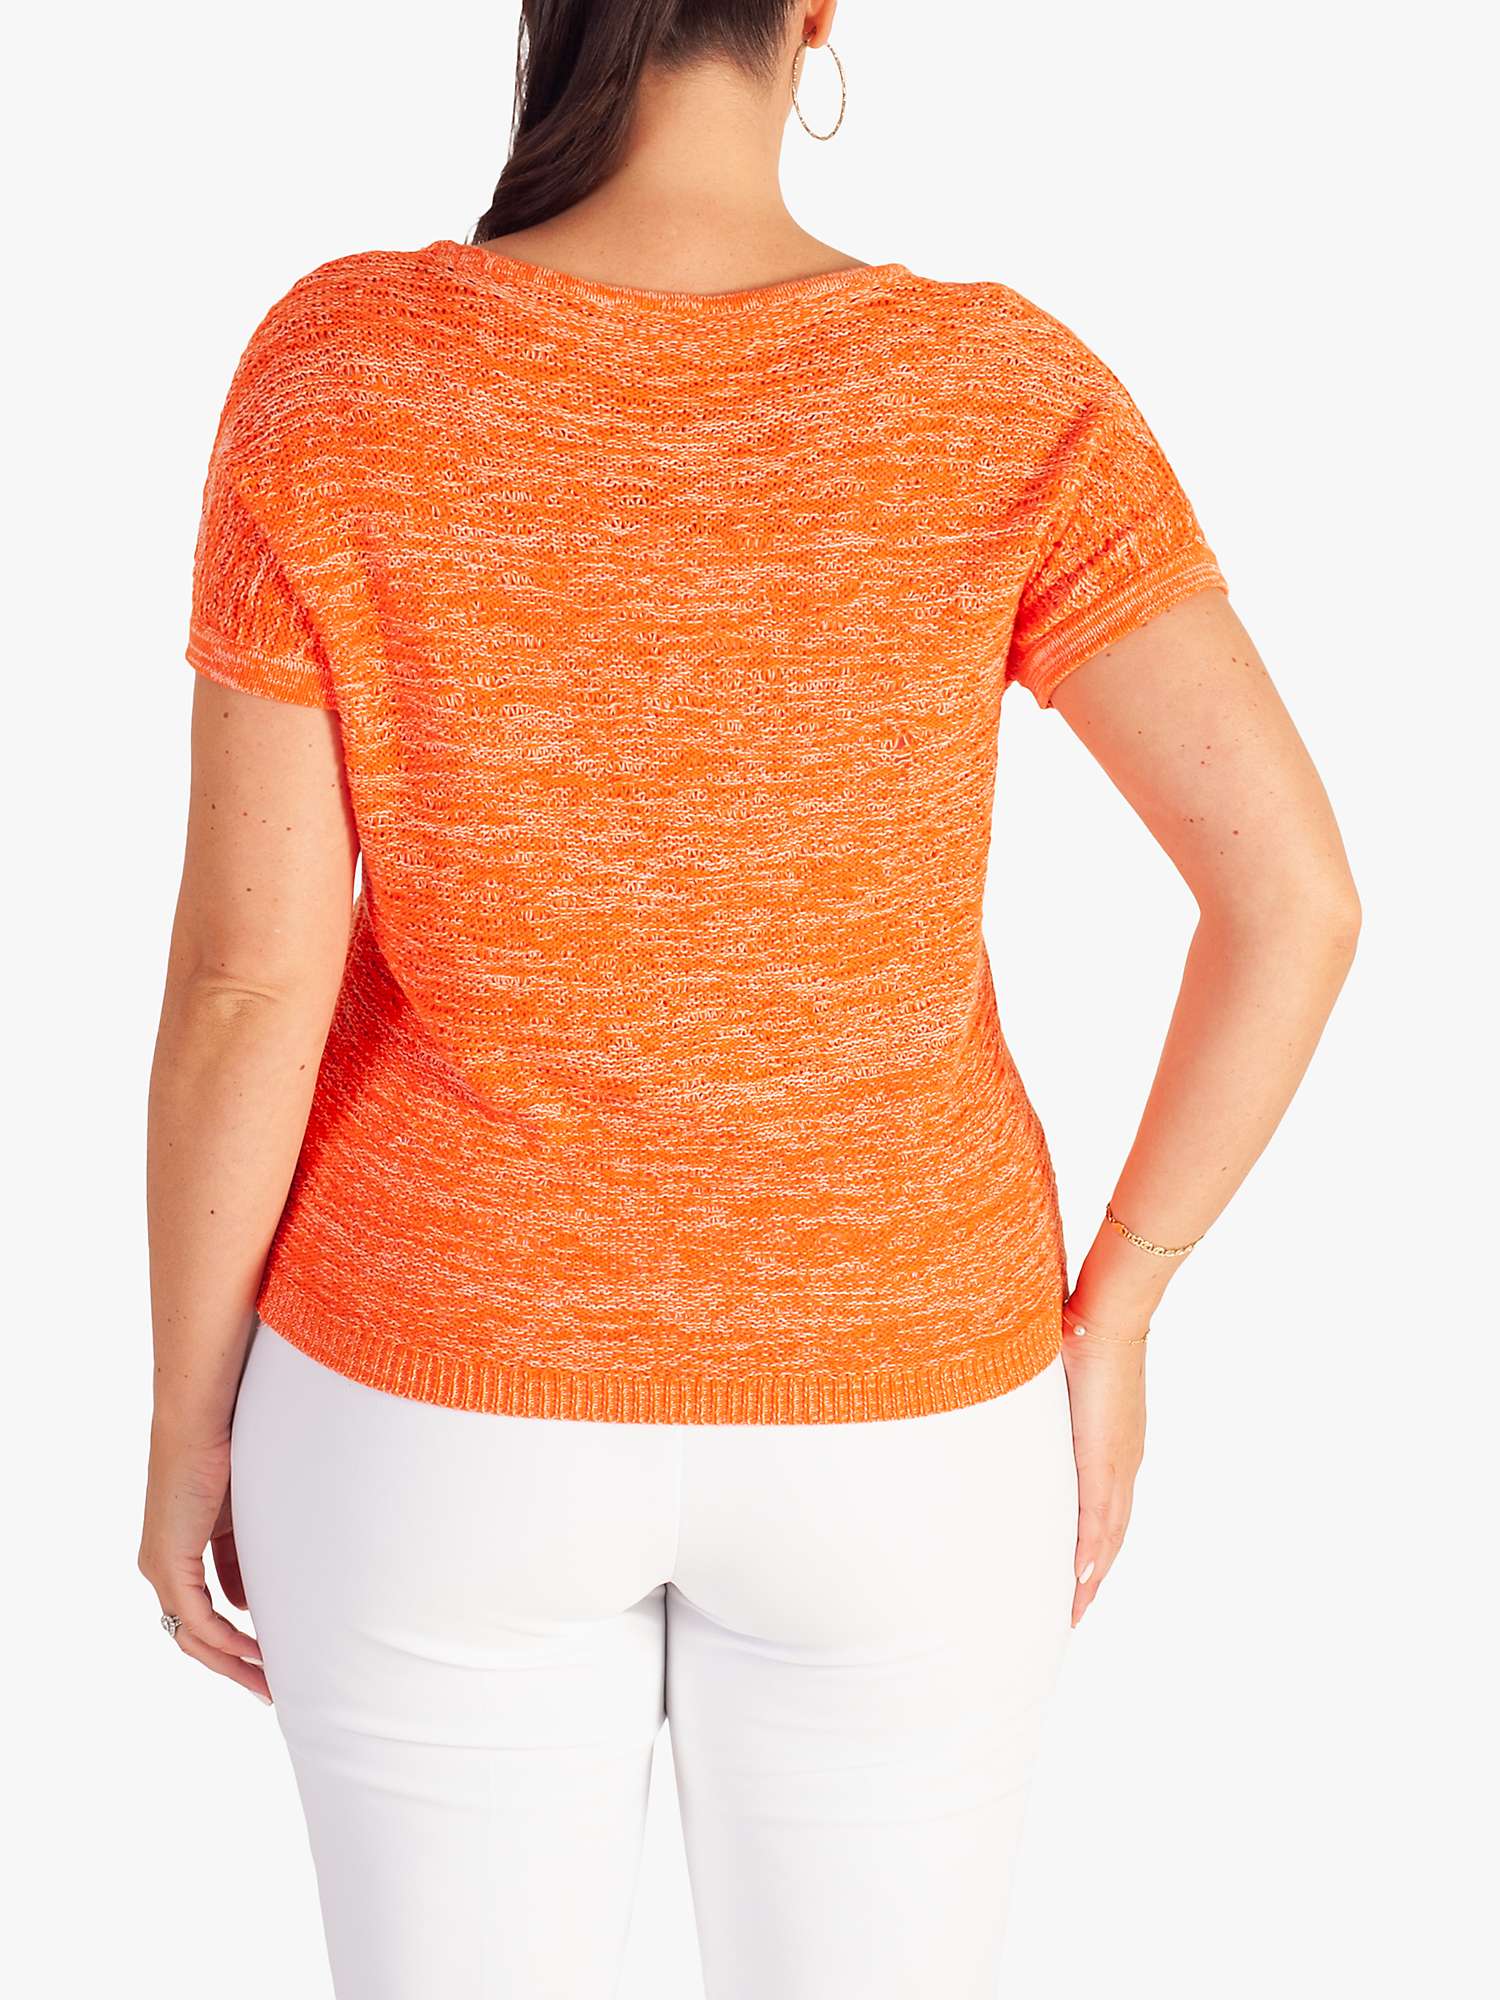 Buy chesca Short Sleeve Knitted Cotton Top, Orange/White Online at johnlewis.com